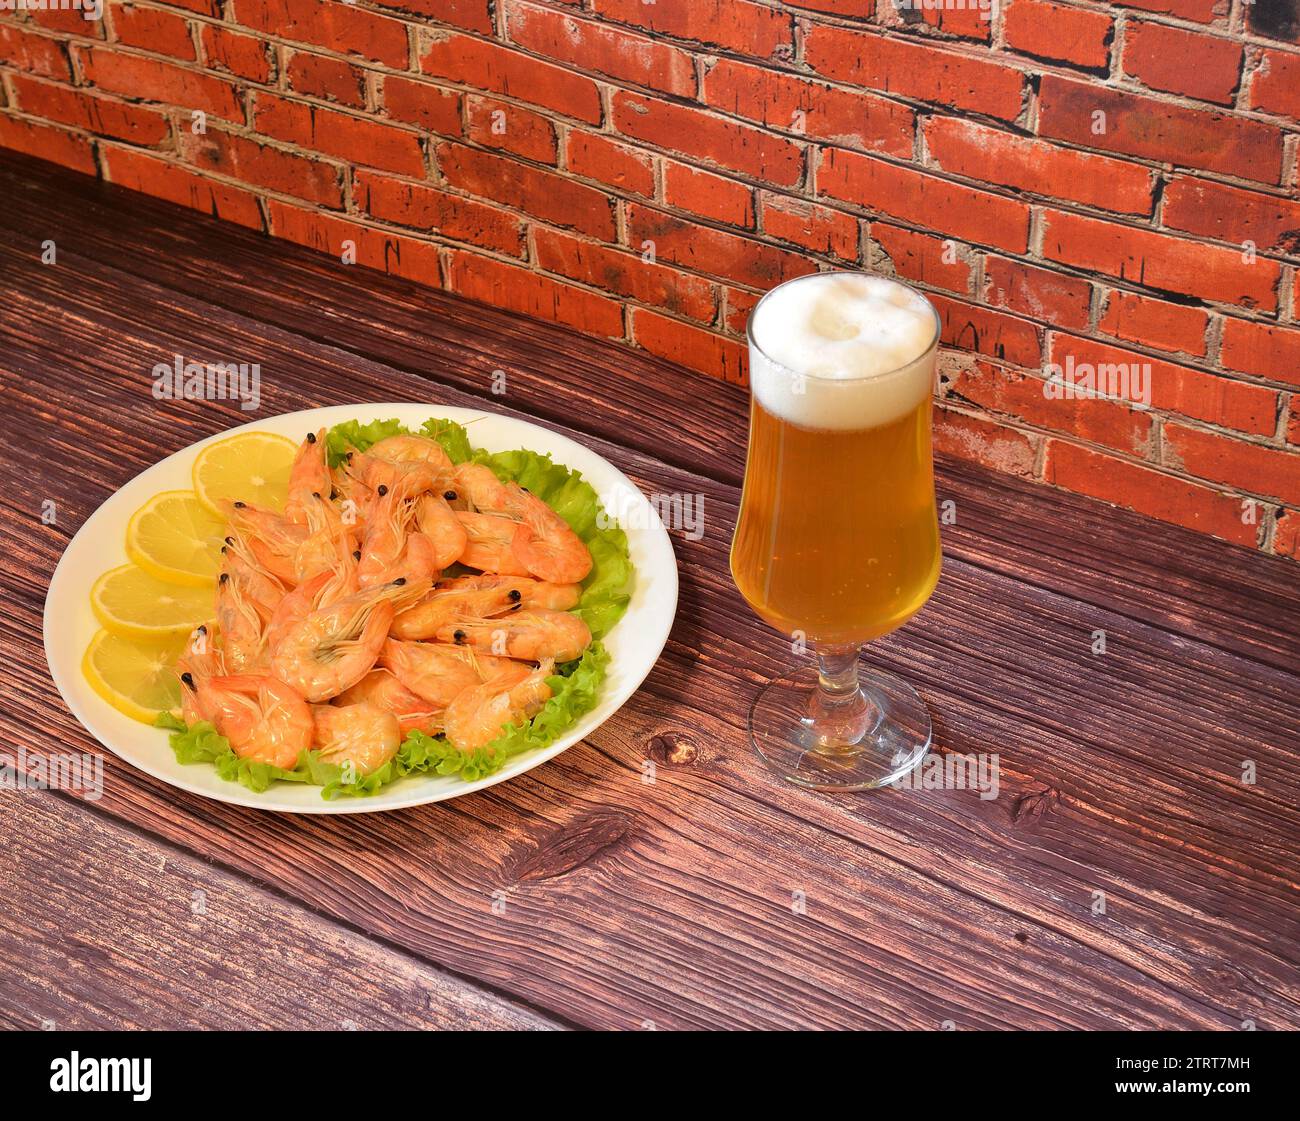 A tall glass of light beer with foam and a plate with boiled shrimp and lemon slices on a wooden table. Close-up. Stock Photo